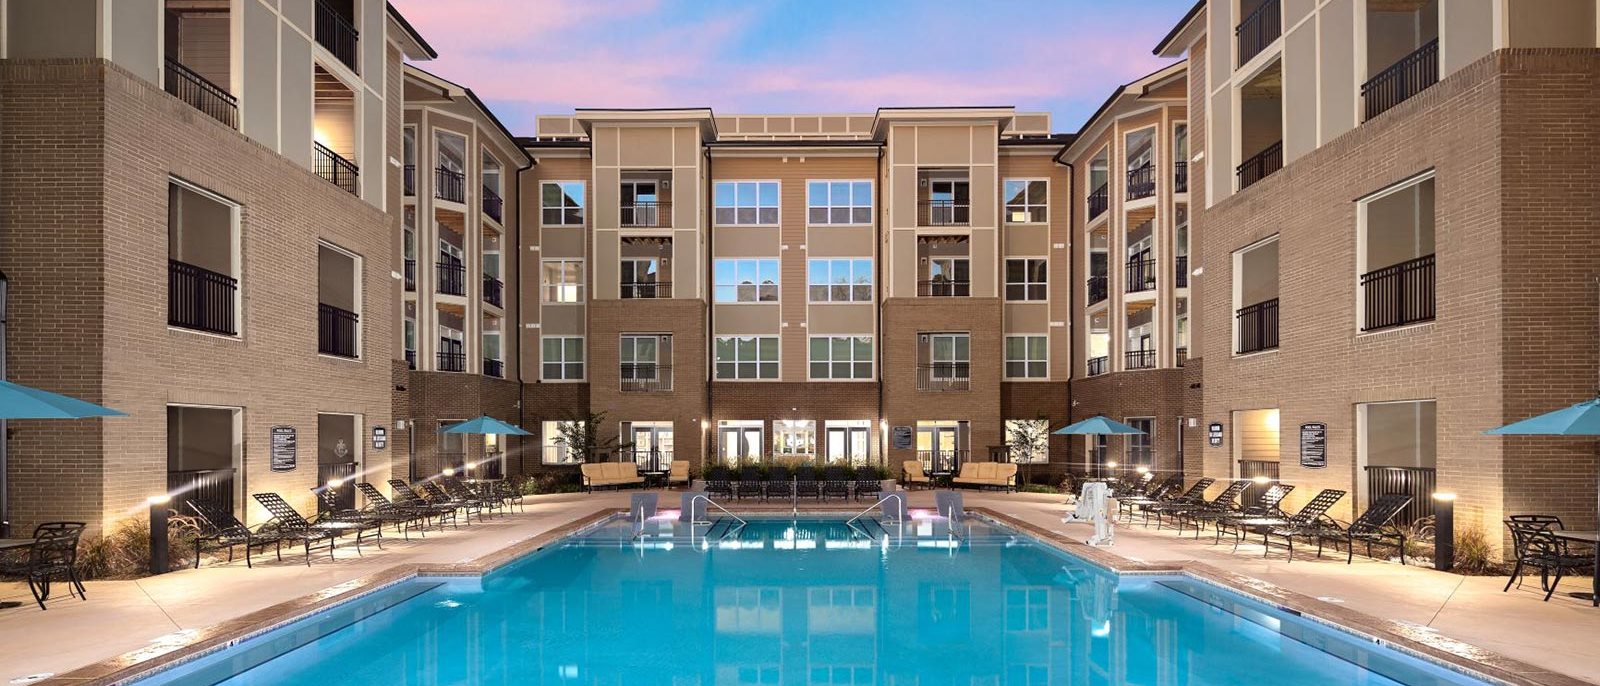 Invigorating Swimming Pool at Abberly Solaire Apartment Homes, Garner, NC